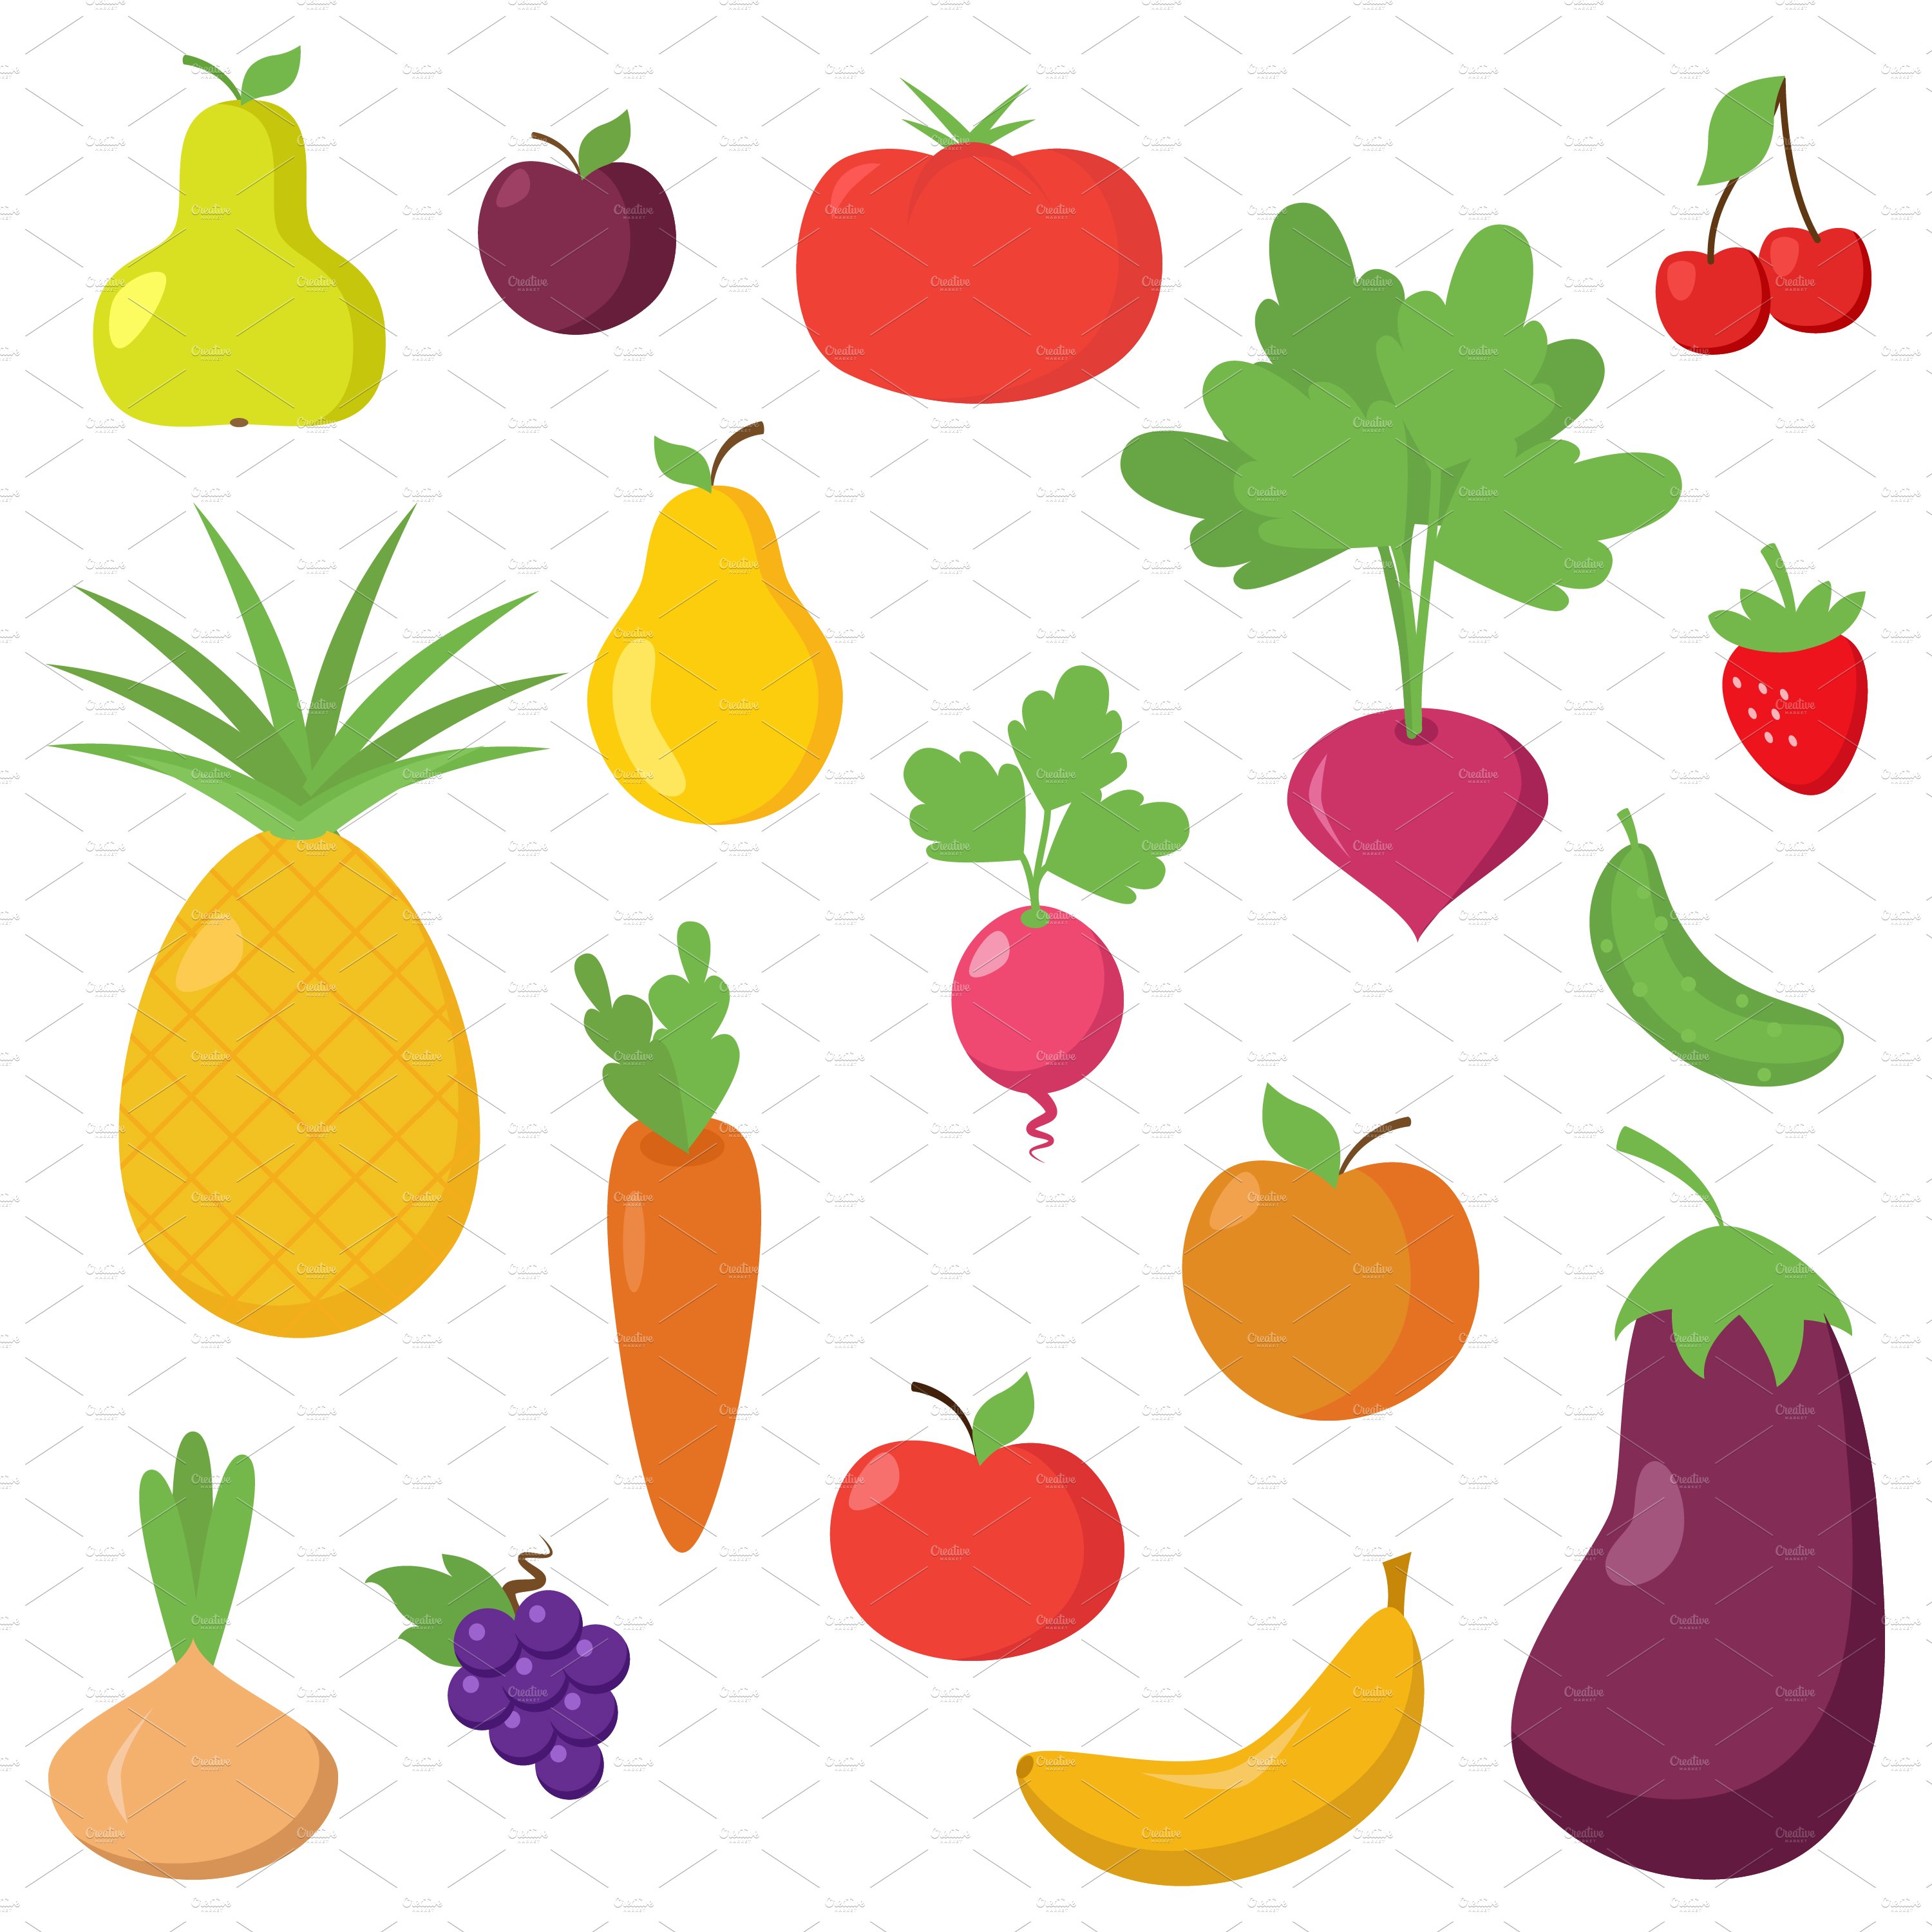 Fruit and Vegetable Vectors/Clipart cover image.